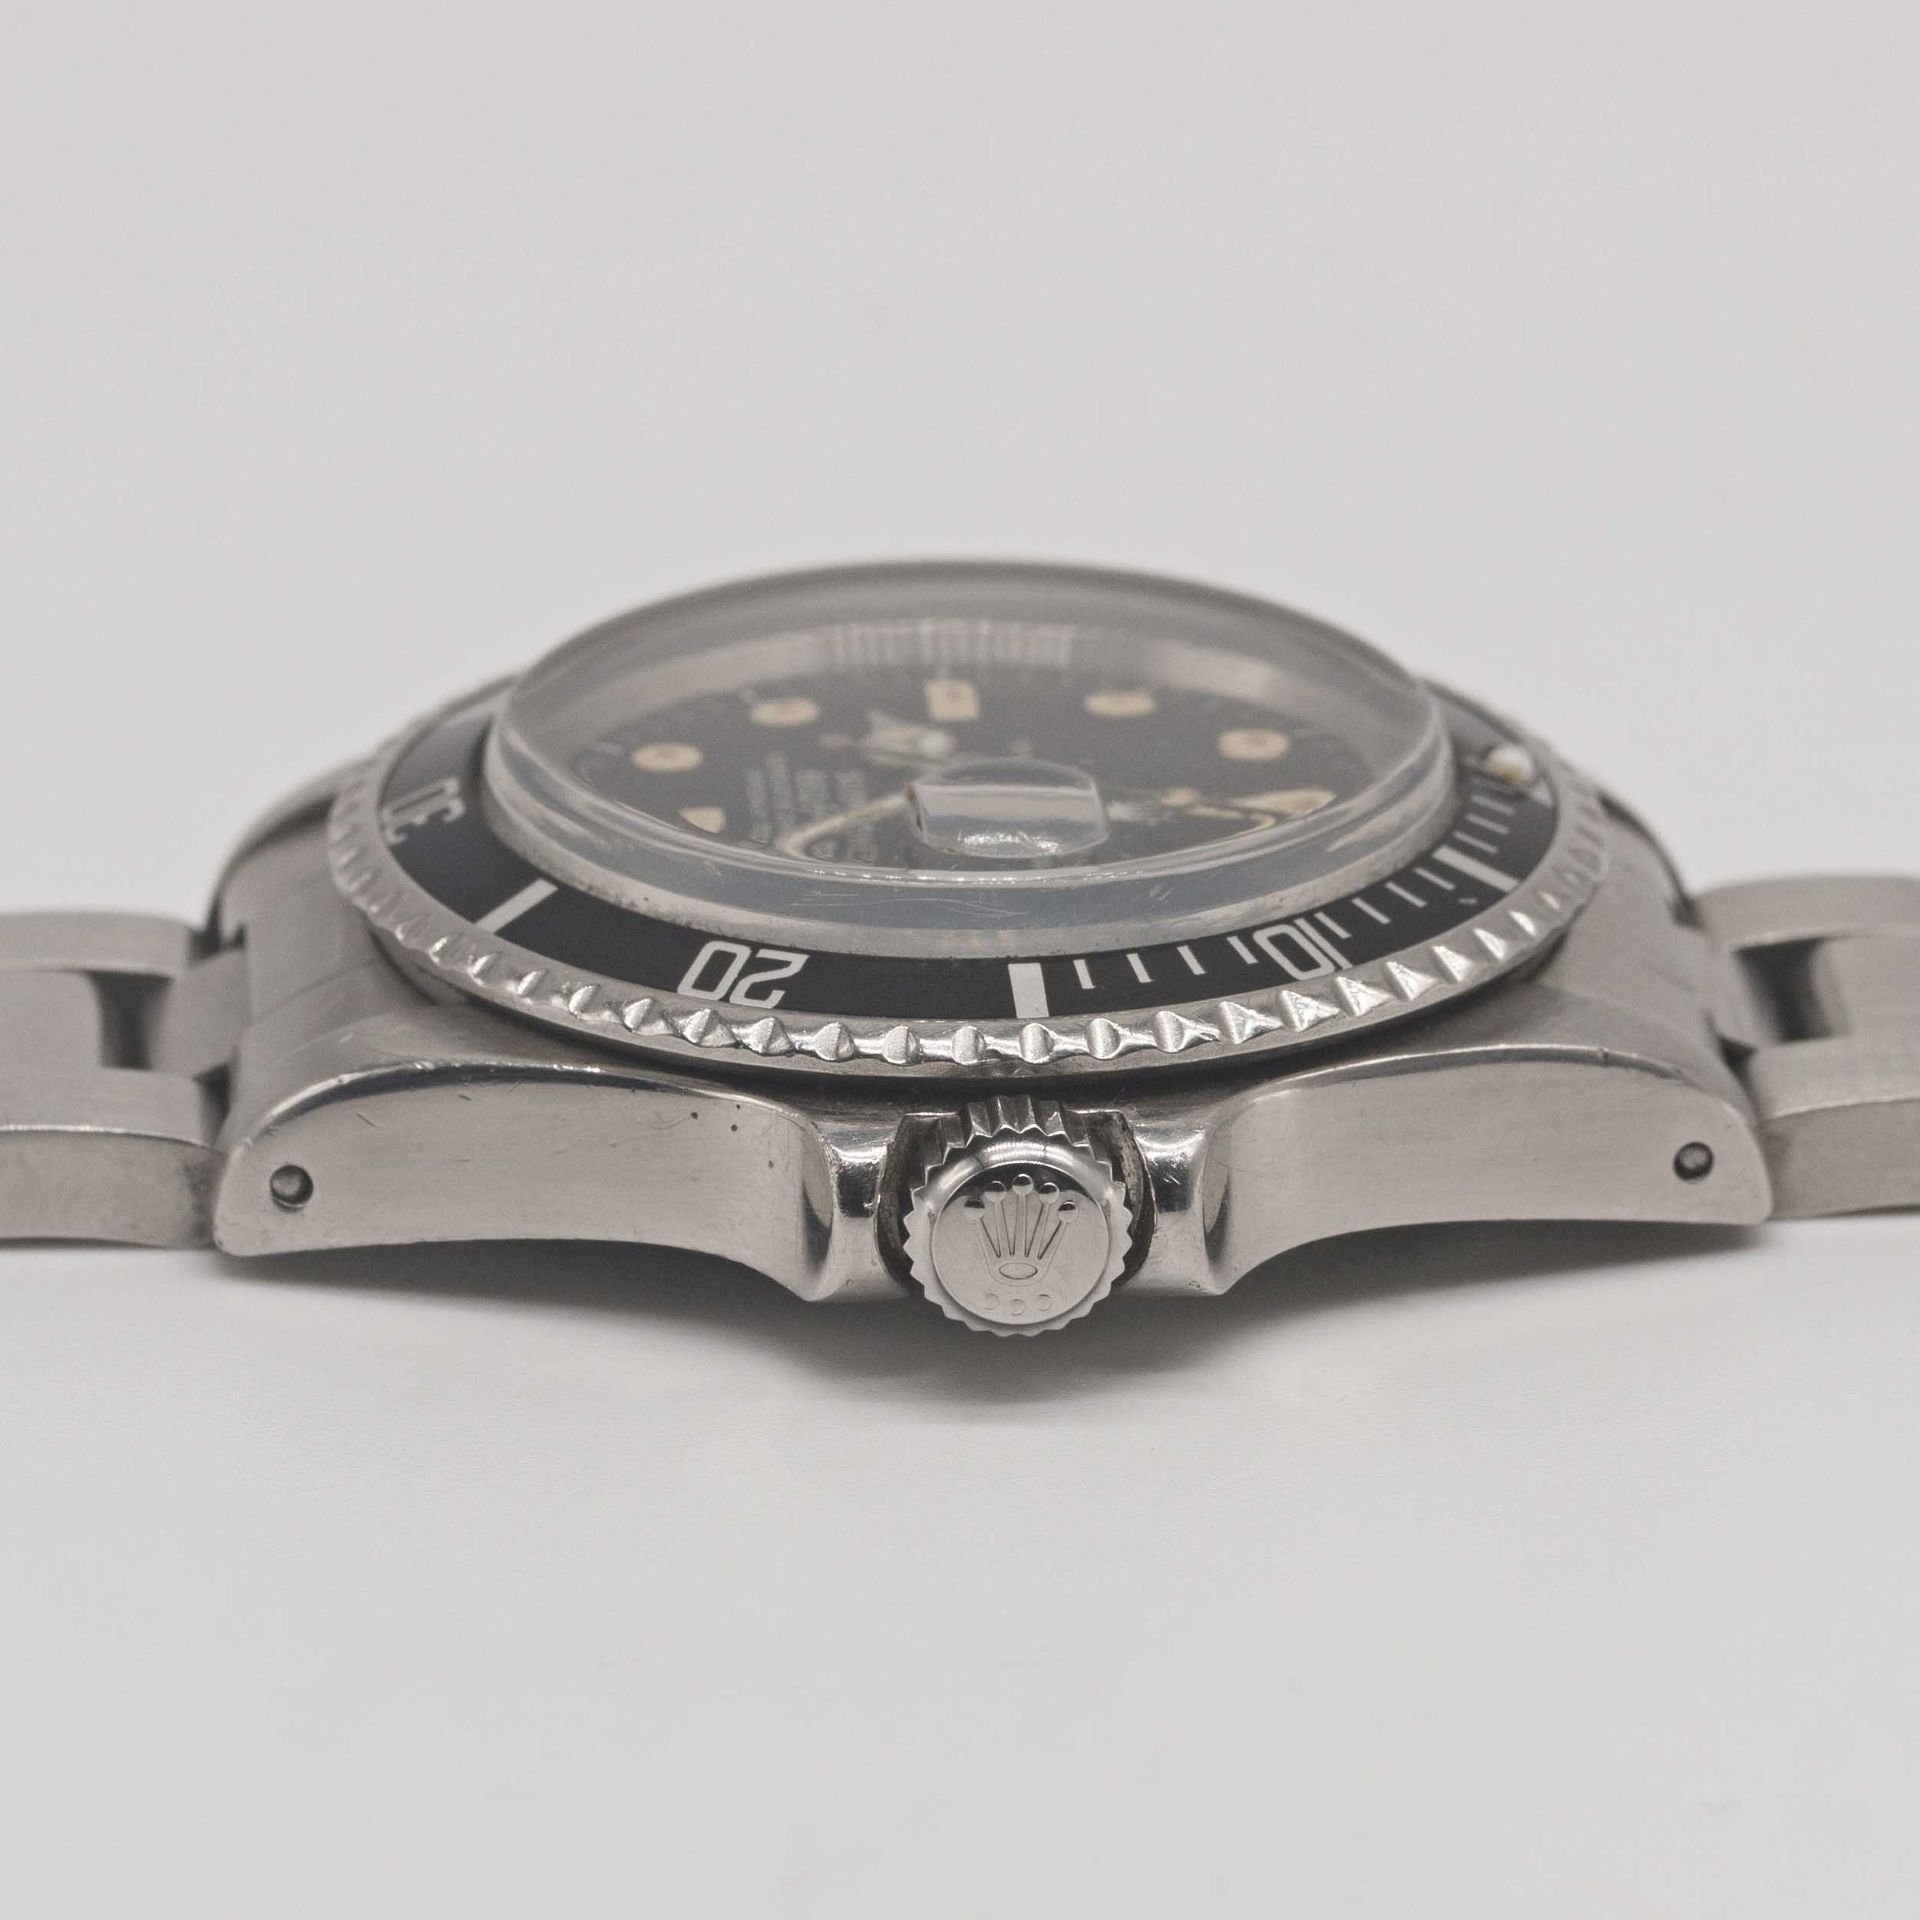 A GENTLEMAN'S STAINLESS STEEL ROLEX OYSTER PERPETUAL DATE SUBMARINER BRACELET WATCH CIRCA 1978, REF. - Image 9 of 10